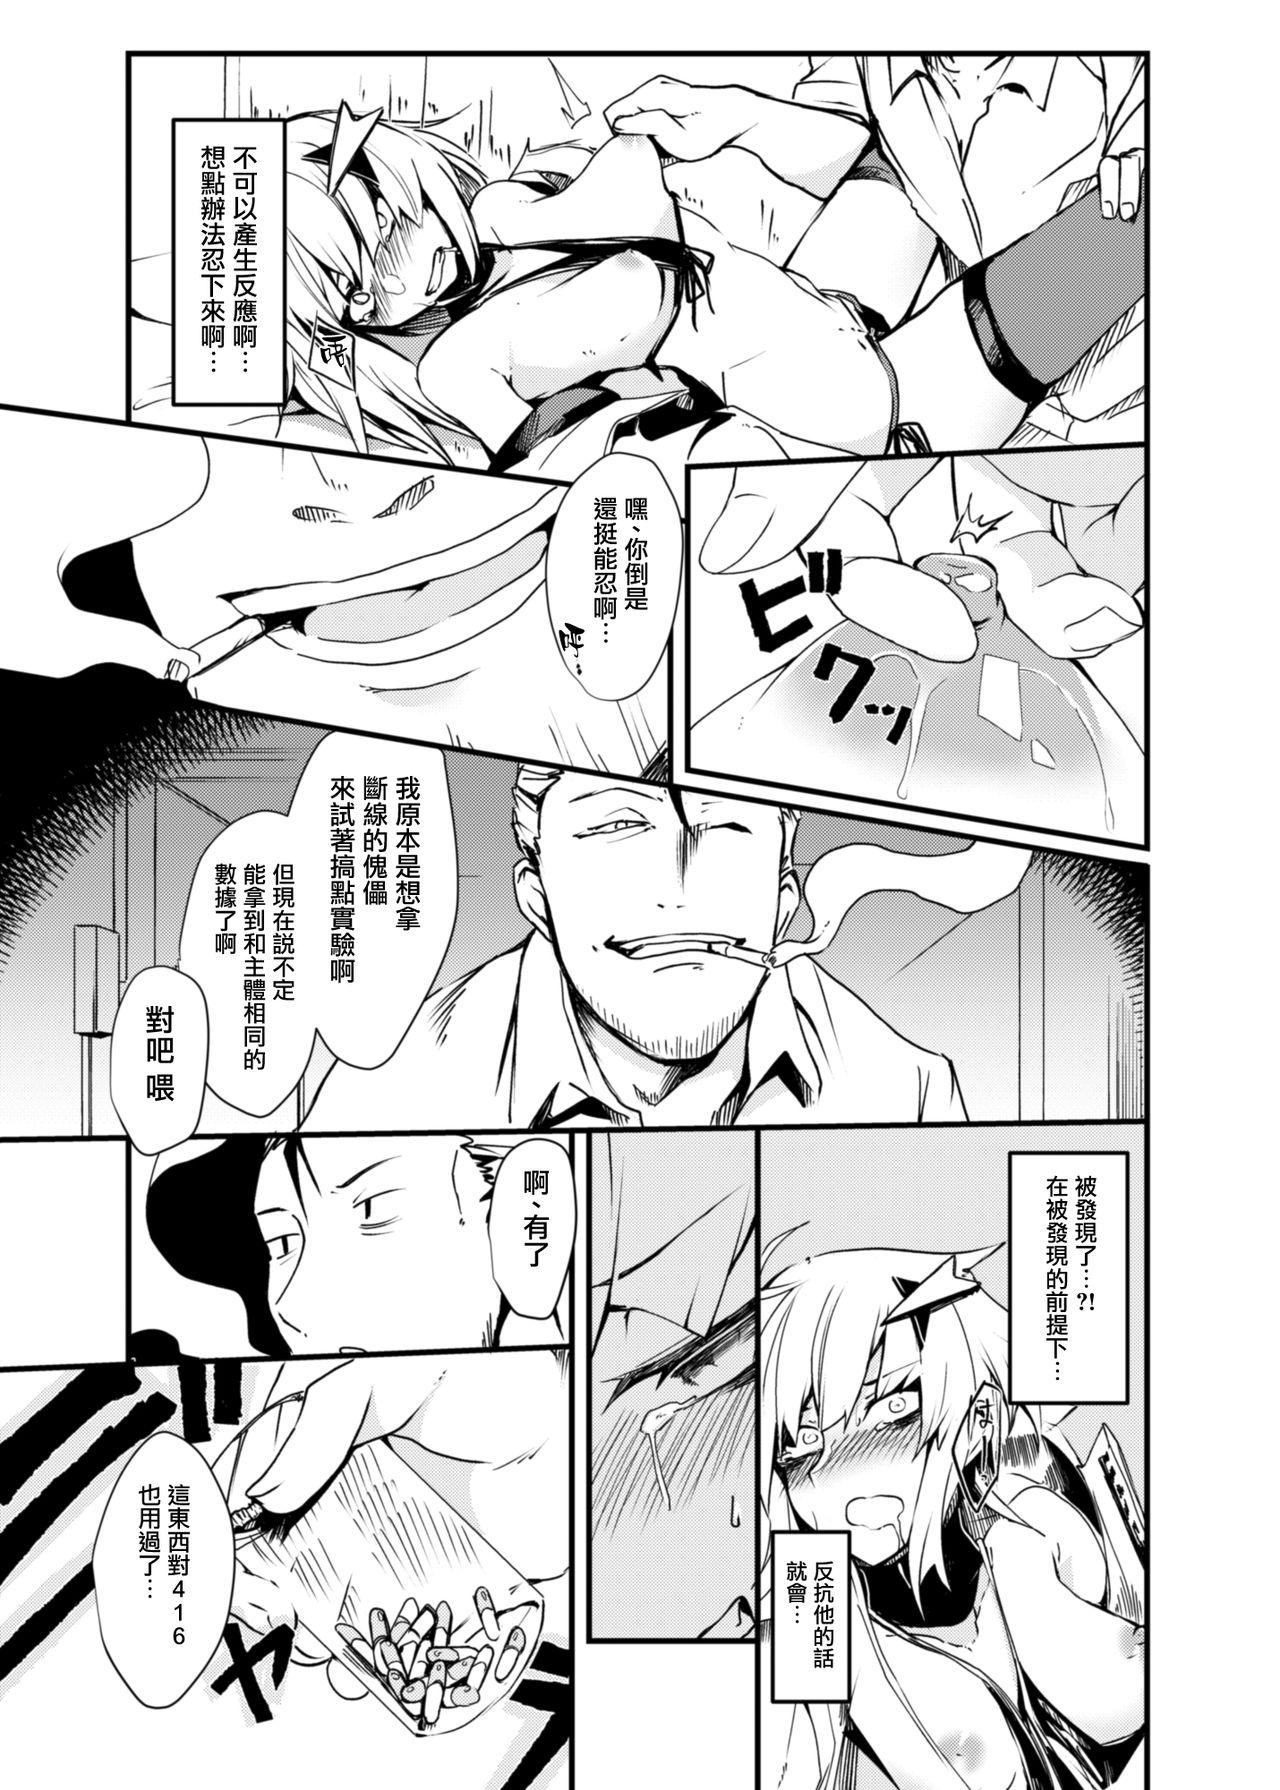 Young Tits Dummy de Saborou. - Girls frontline Tribbing - Page 9